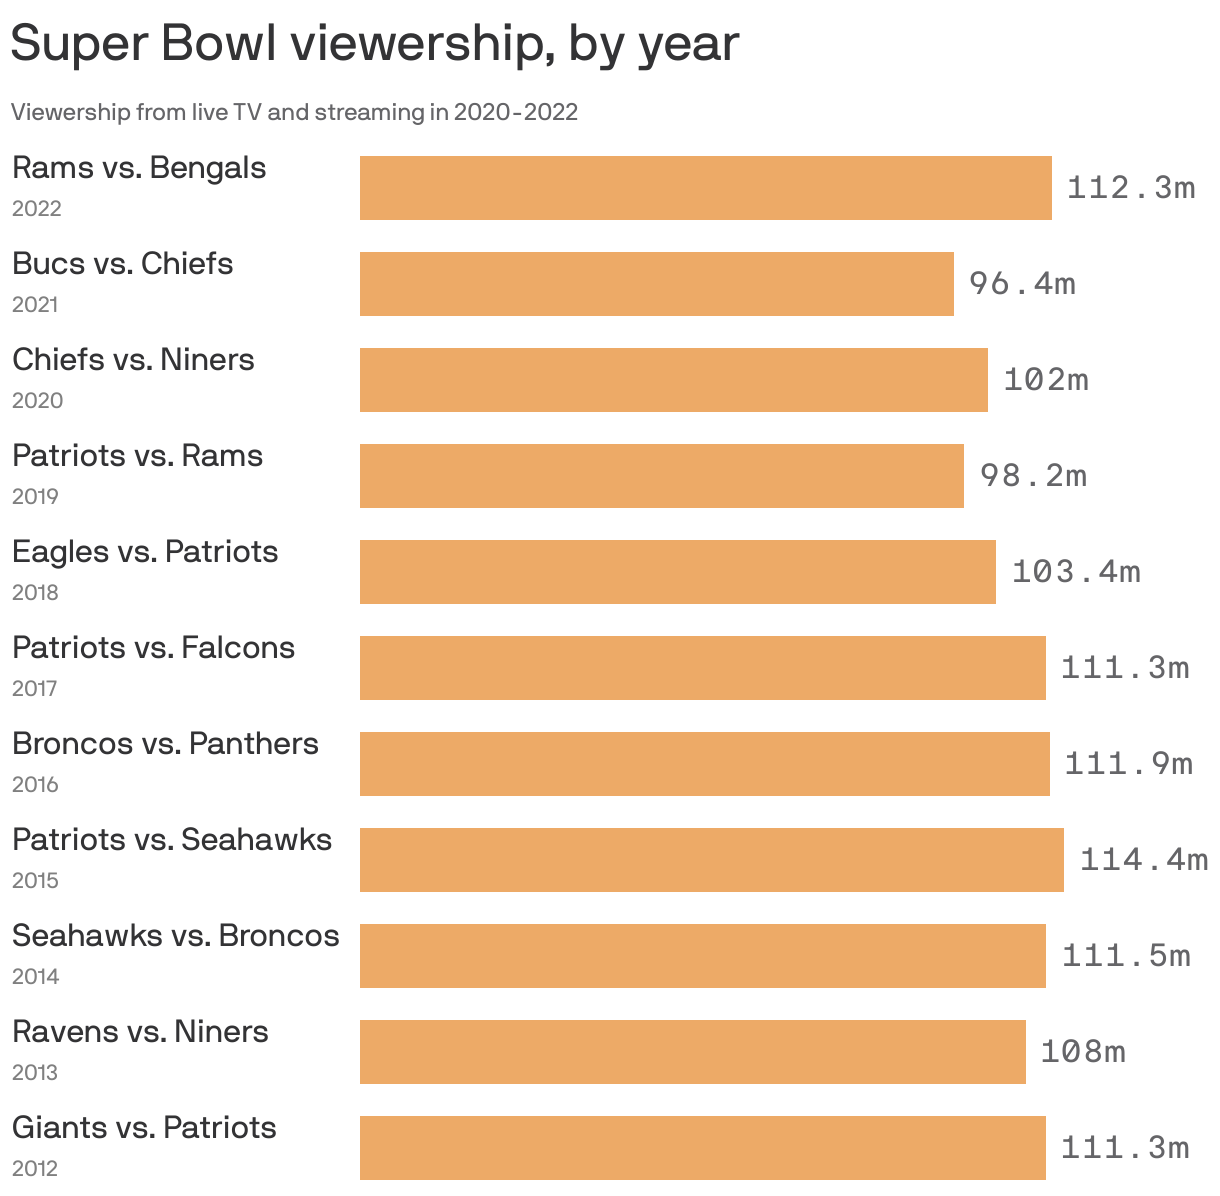 Super Bowl viewership, by year